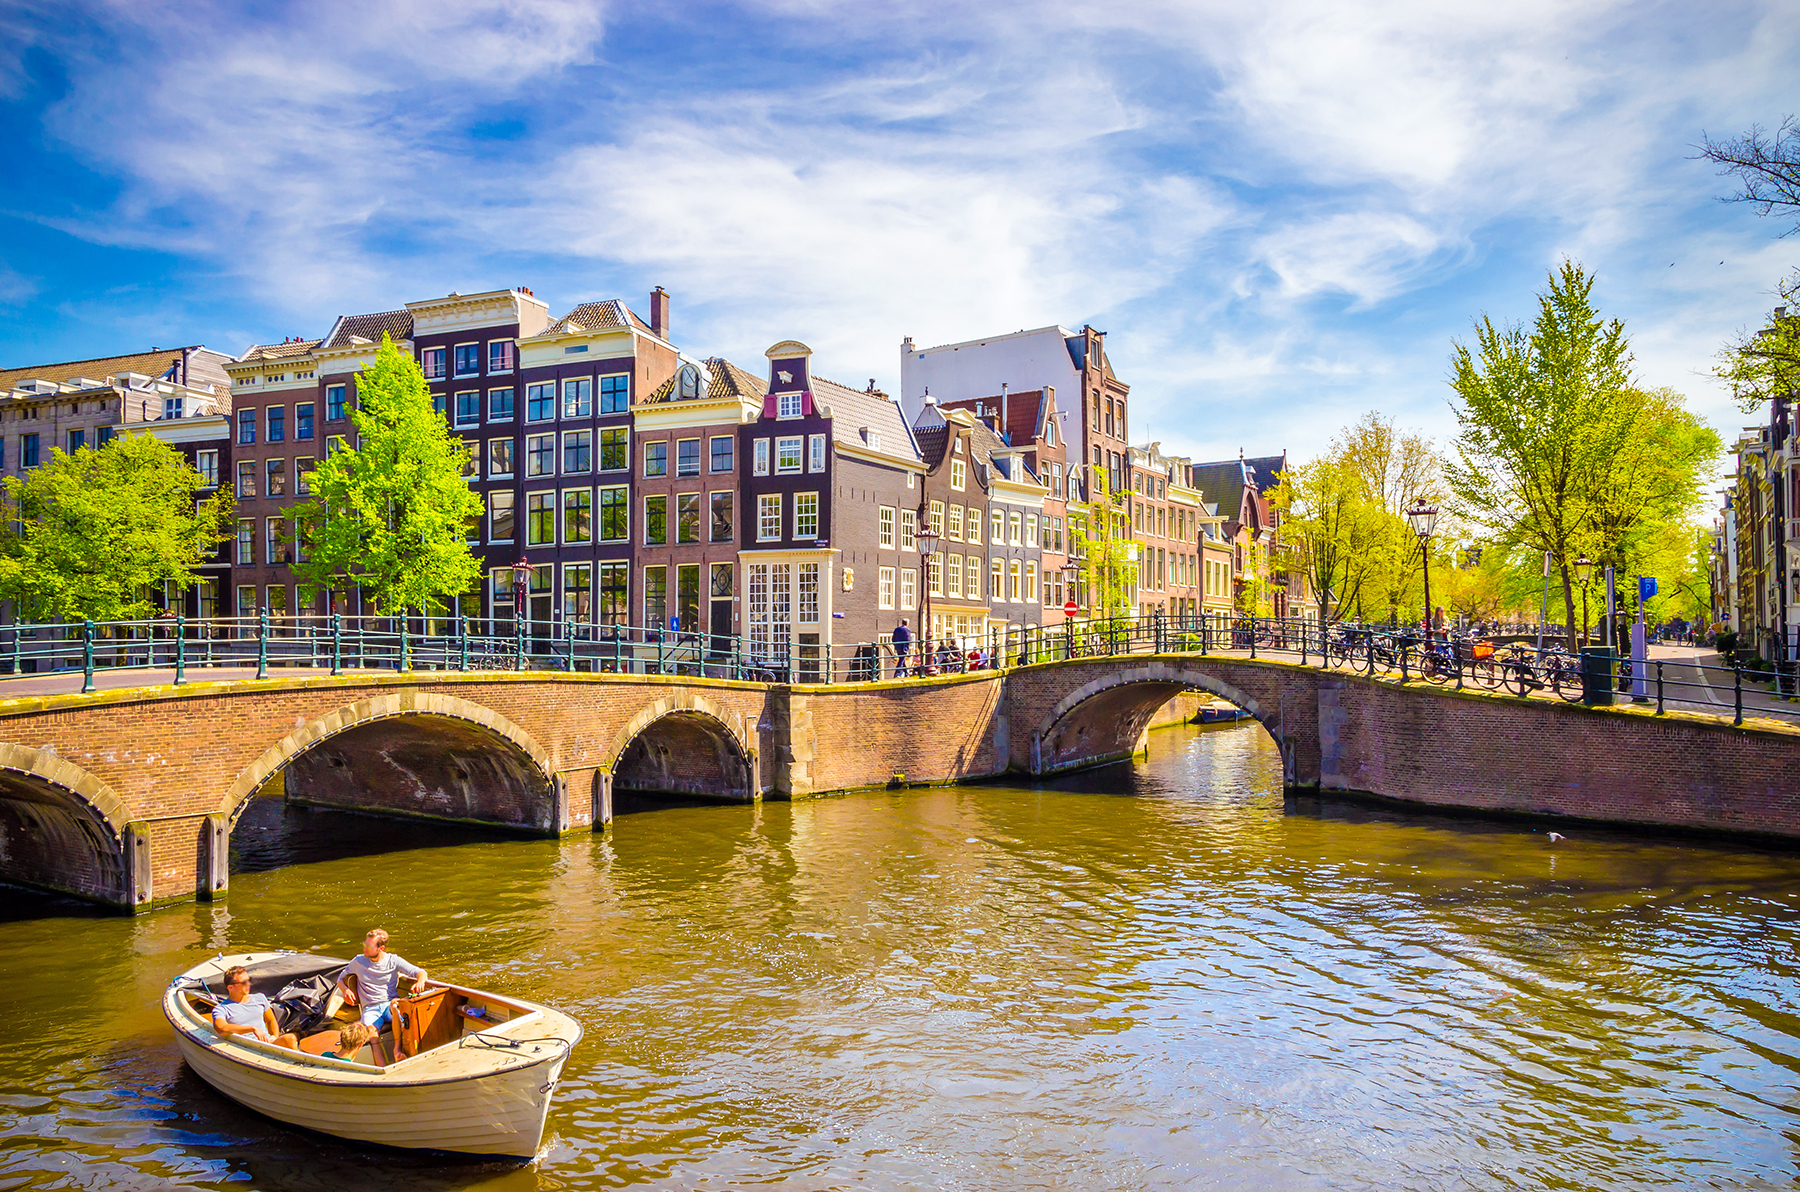 Bridges on the canals of Amsterdam